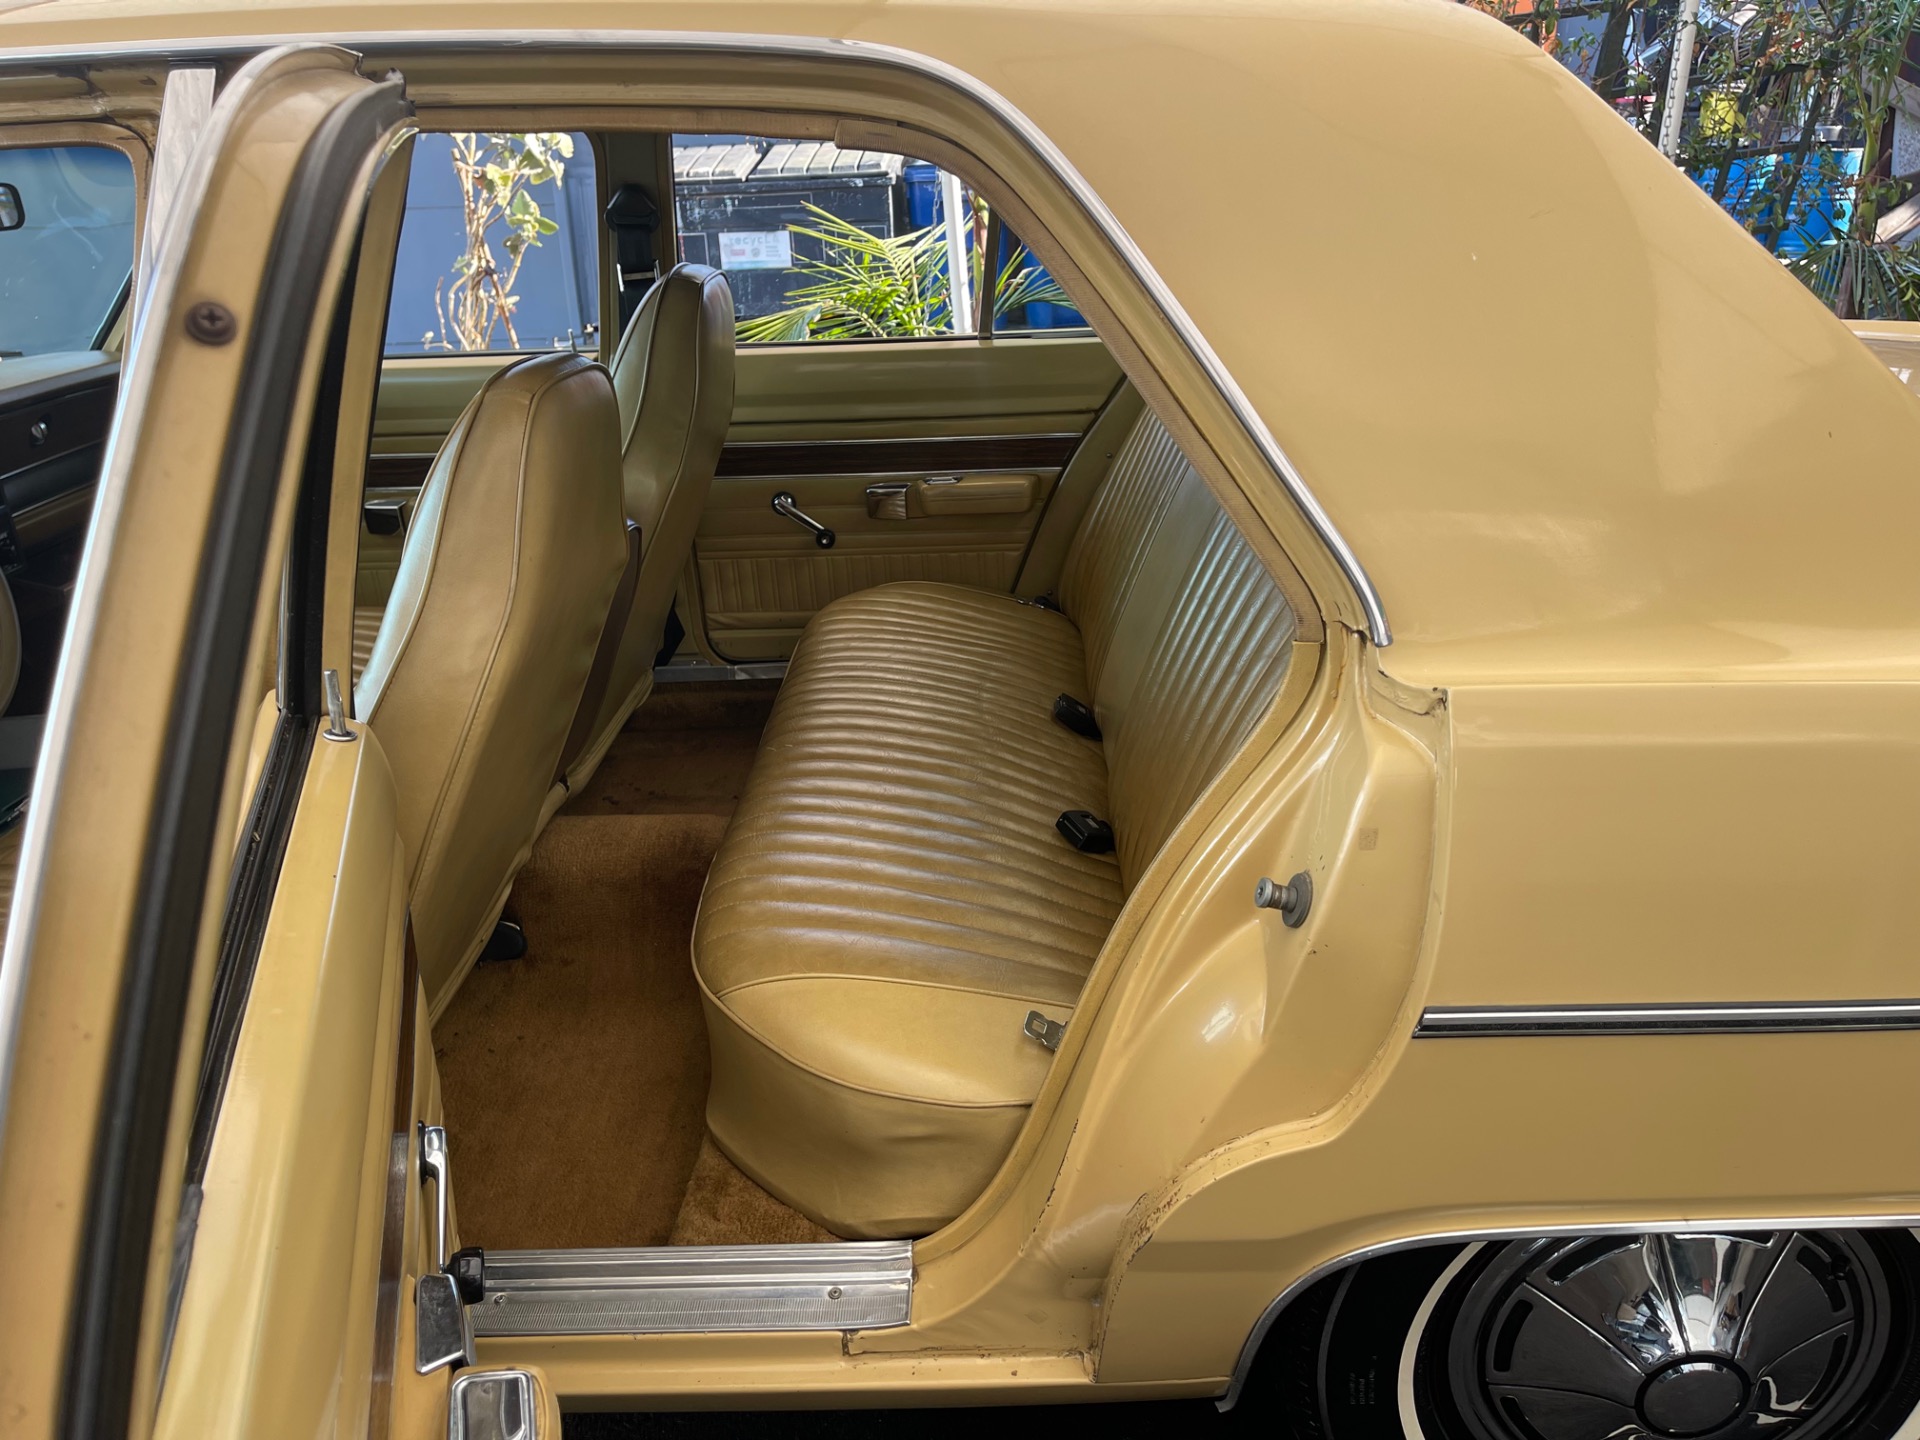 Used 1976 Plymouth Taxi